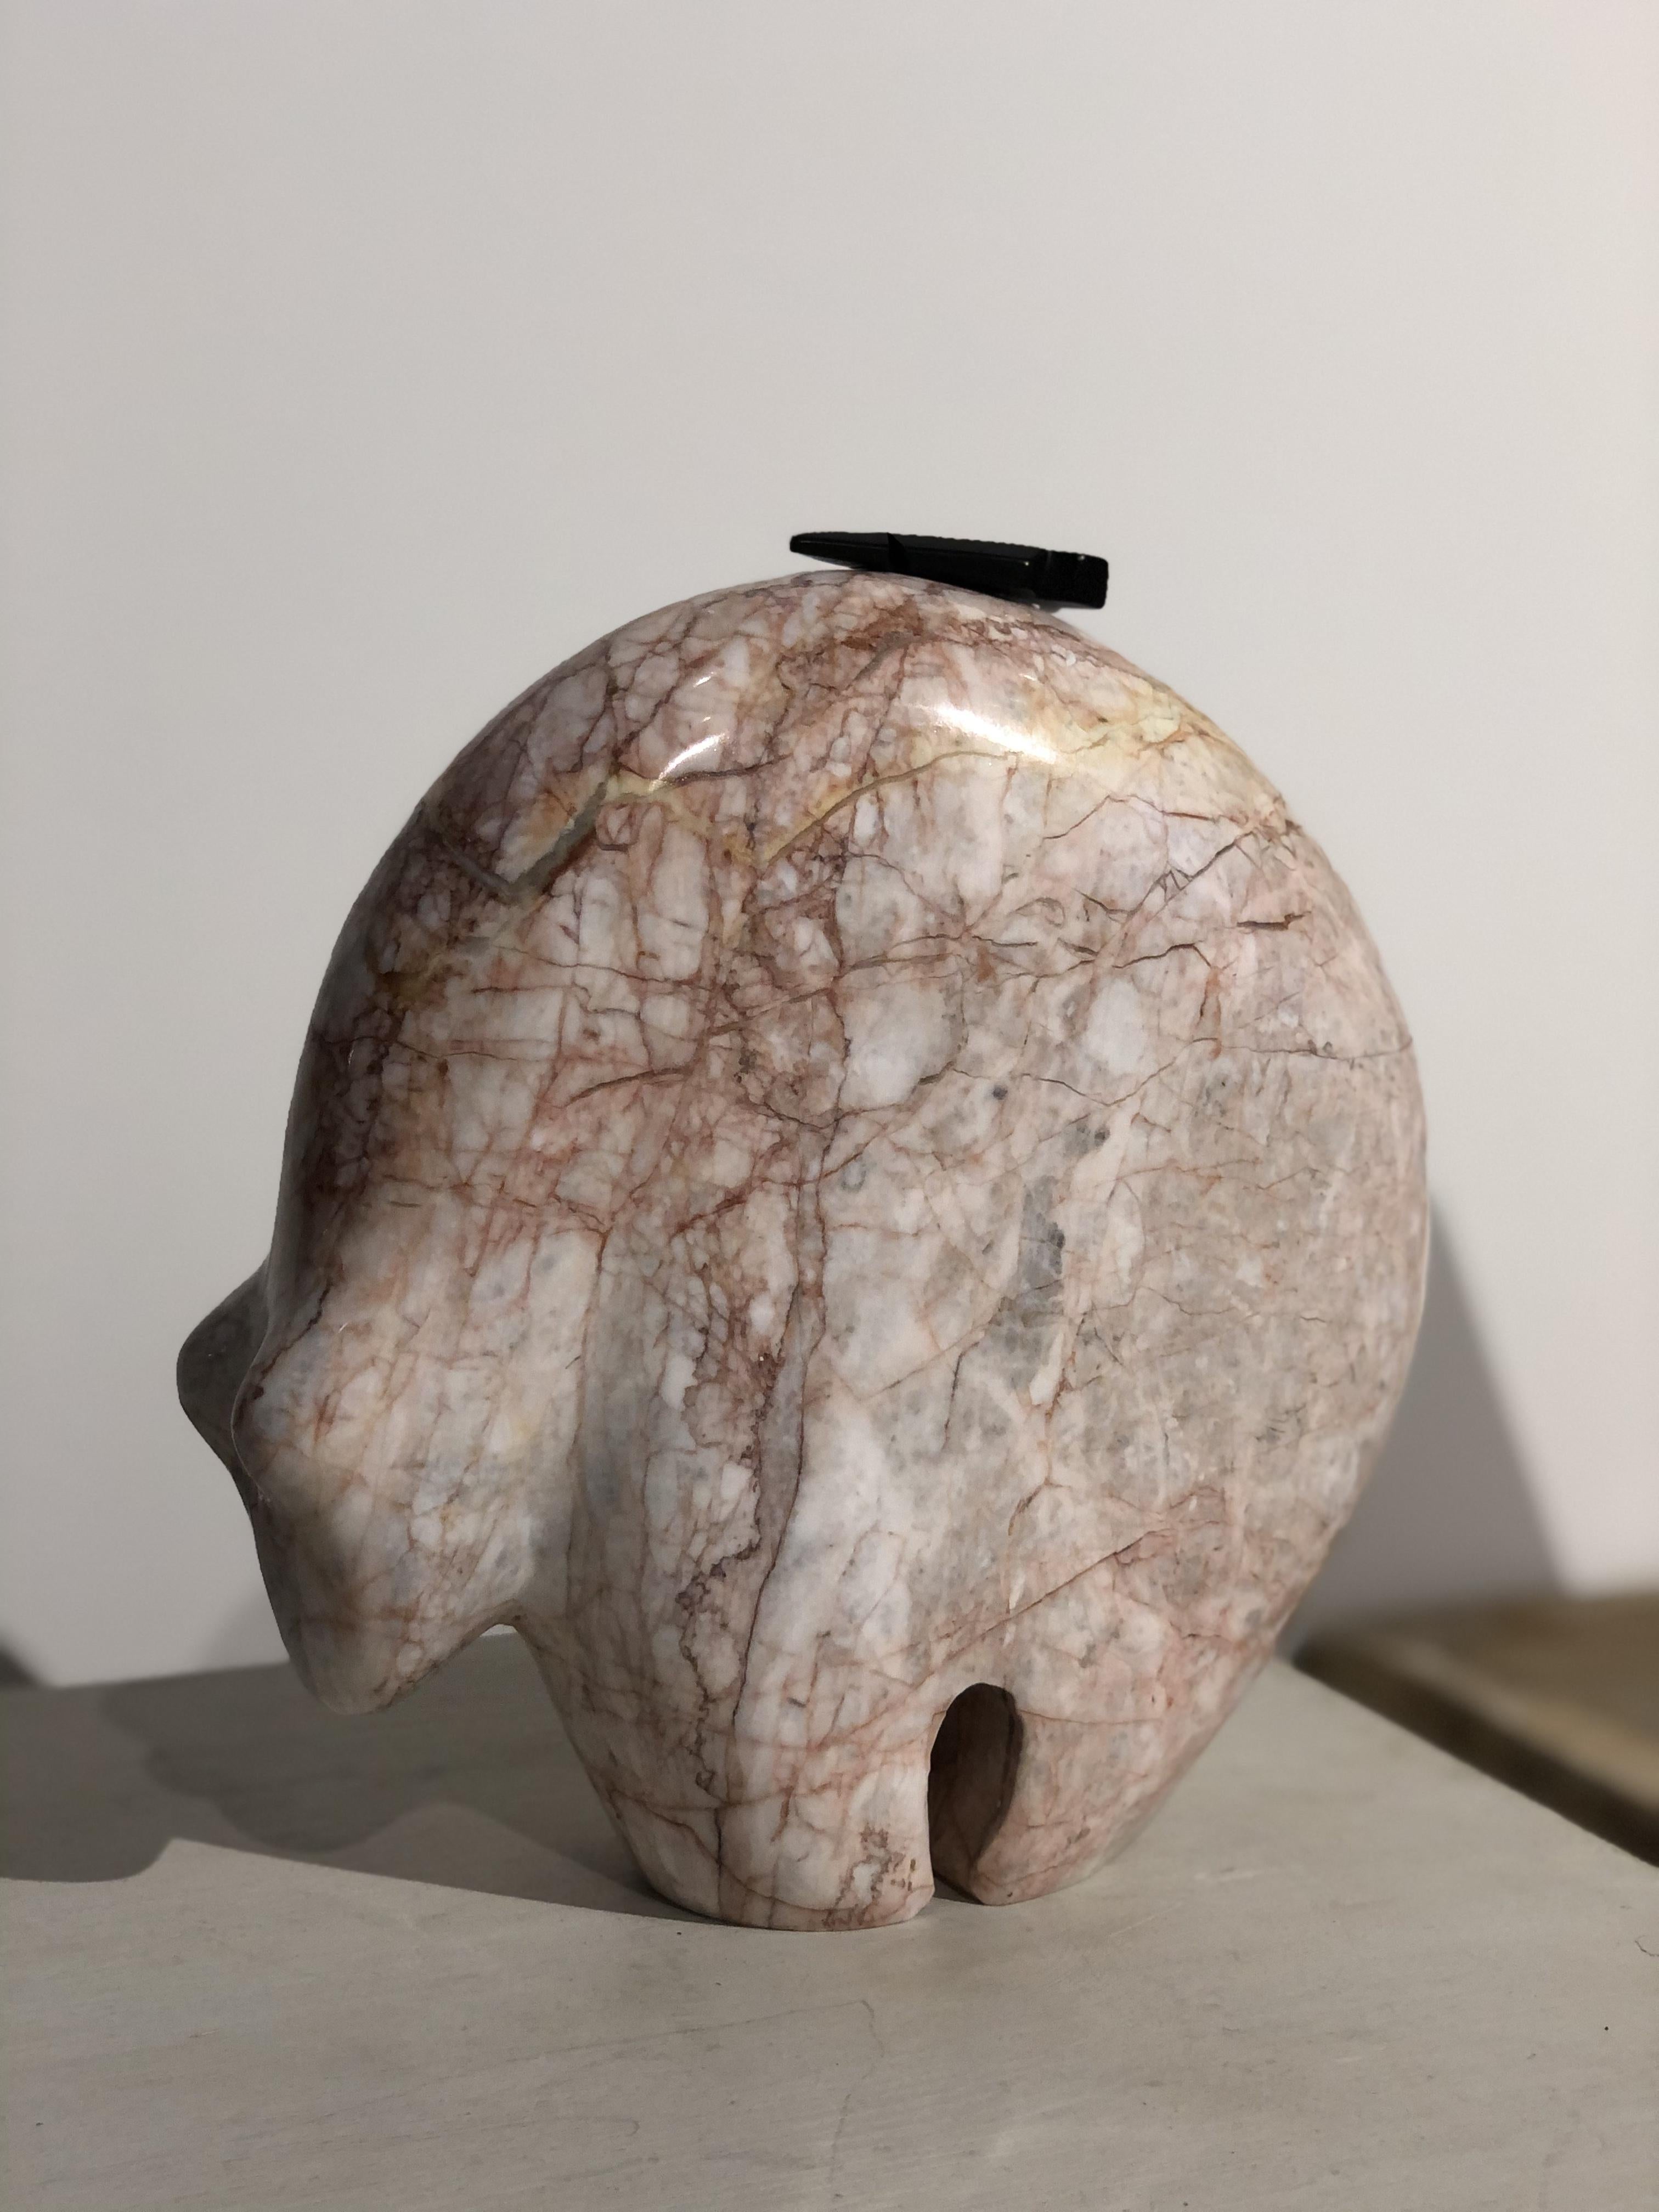 A playful abstract bear figurine carved from polished pink marble bear. Organic form with a rounded back, minimal features, and a black arrow perched on its back. Made in the mid-20th century in a modern abstract style.